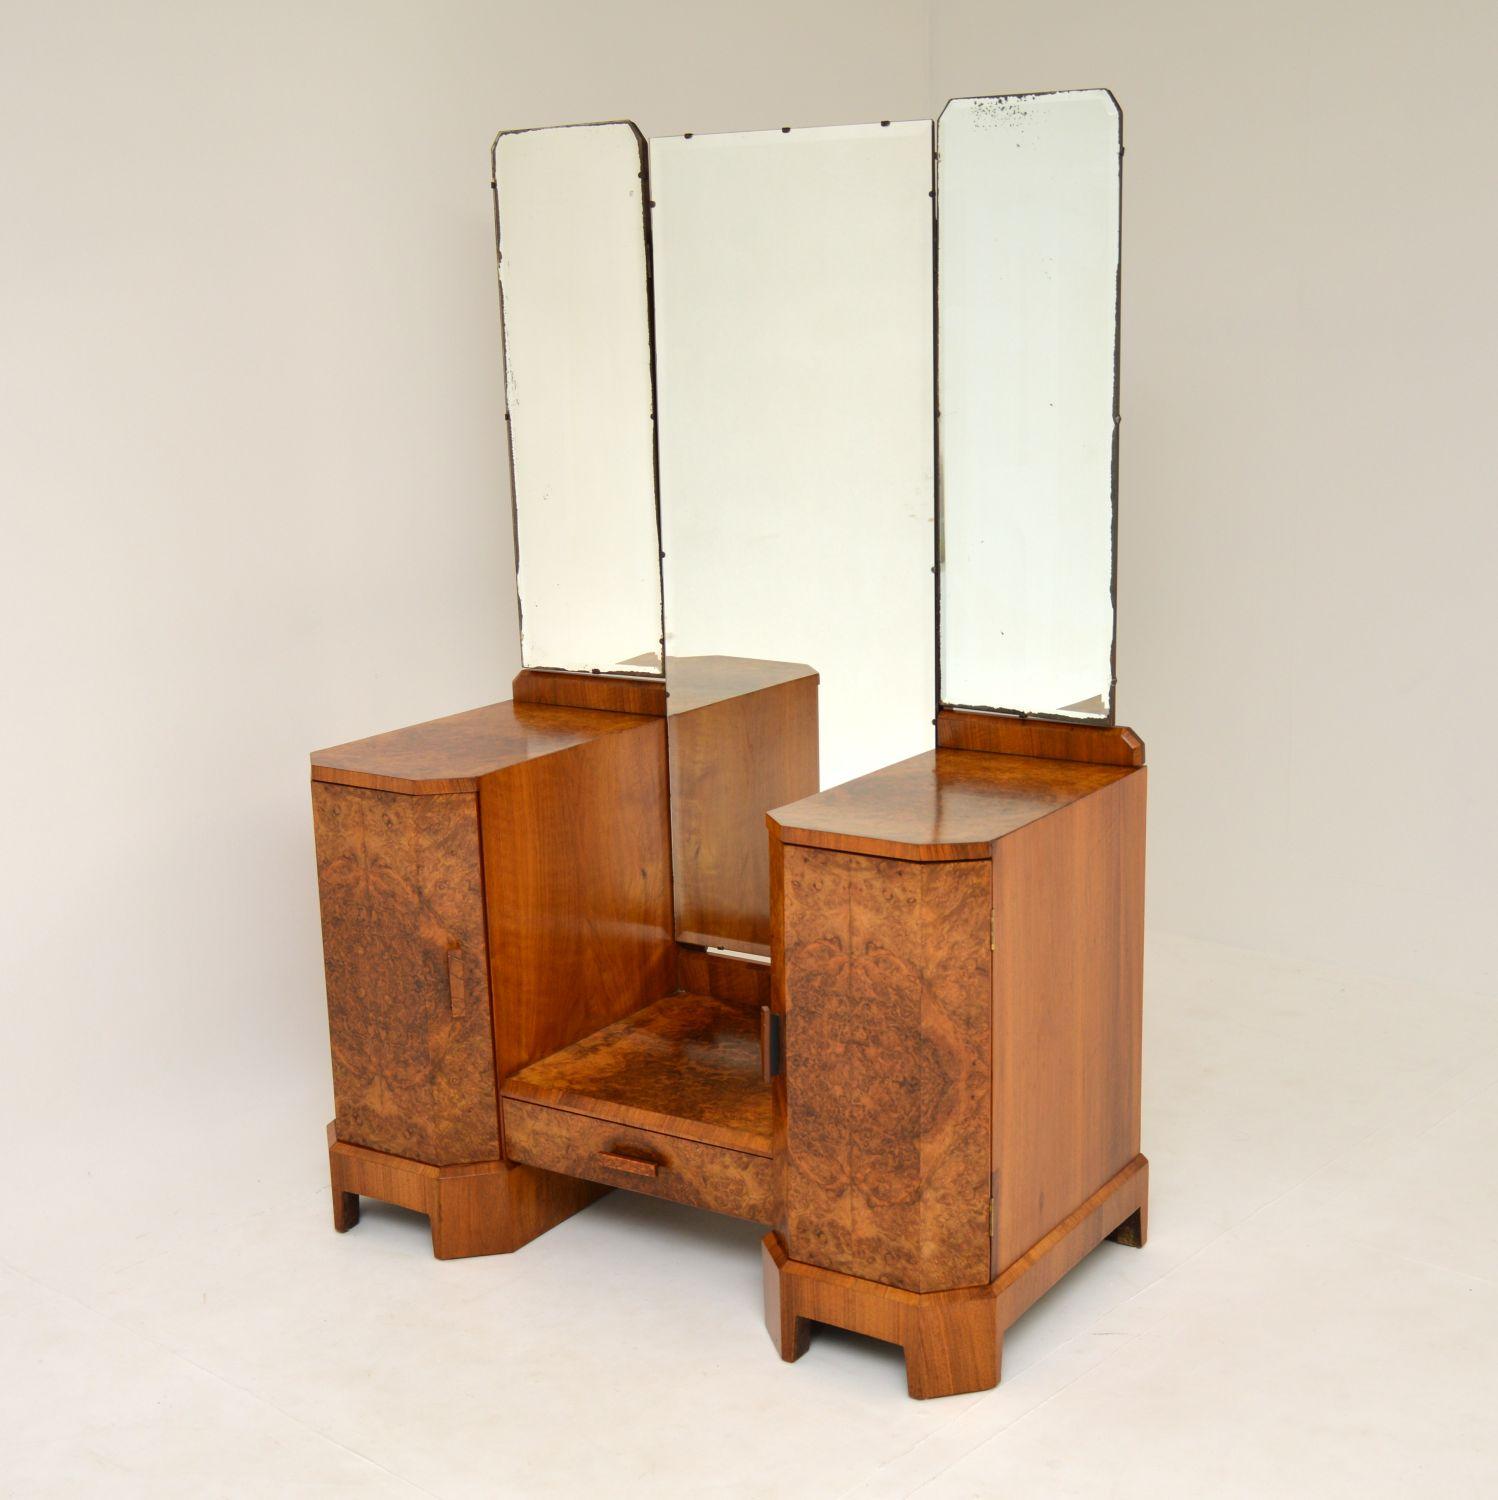 A stunning original Art Deco period twin pedestal dressing table. This is beautifully made from burr walnut, it dates from circa 1920s-1930s.

It is of amazing quality, and has lot of nice features. The burr walnut has stunning grain patterns and